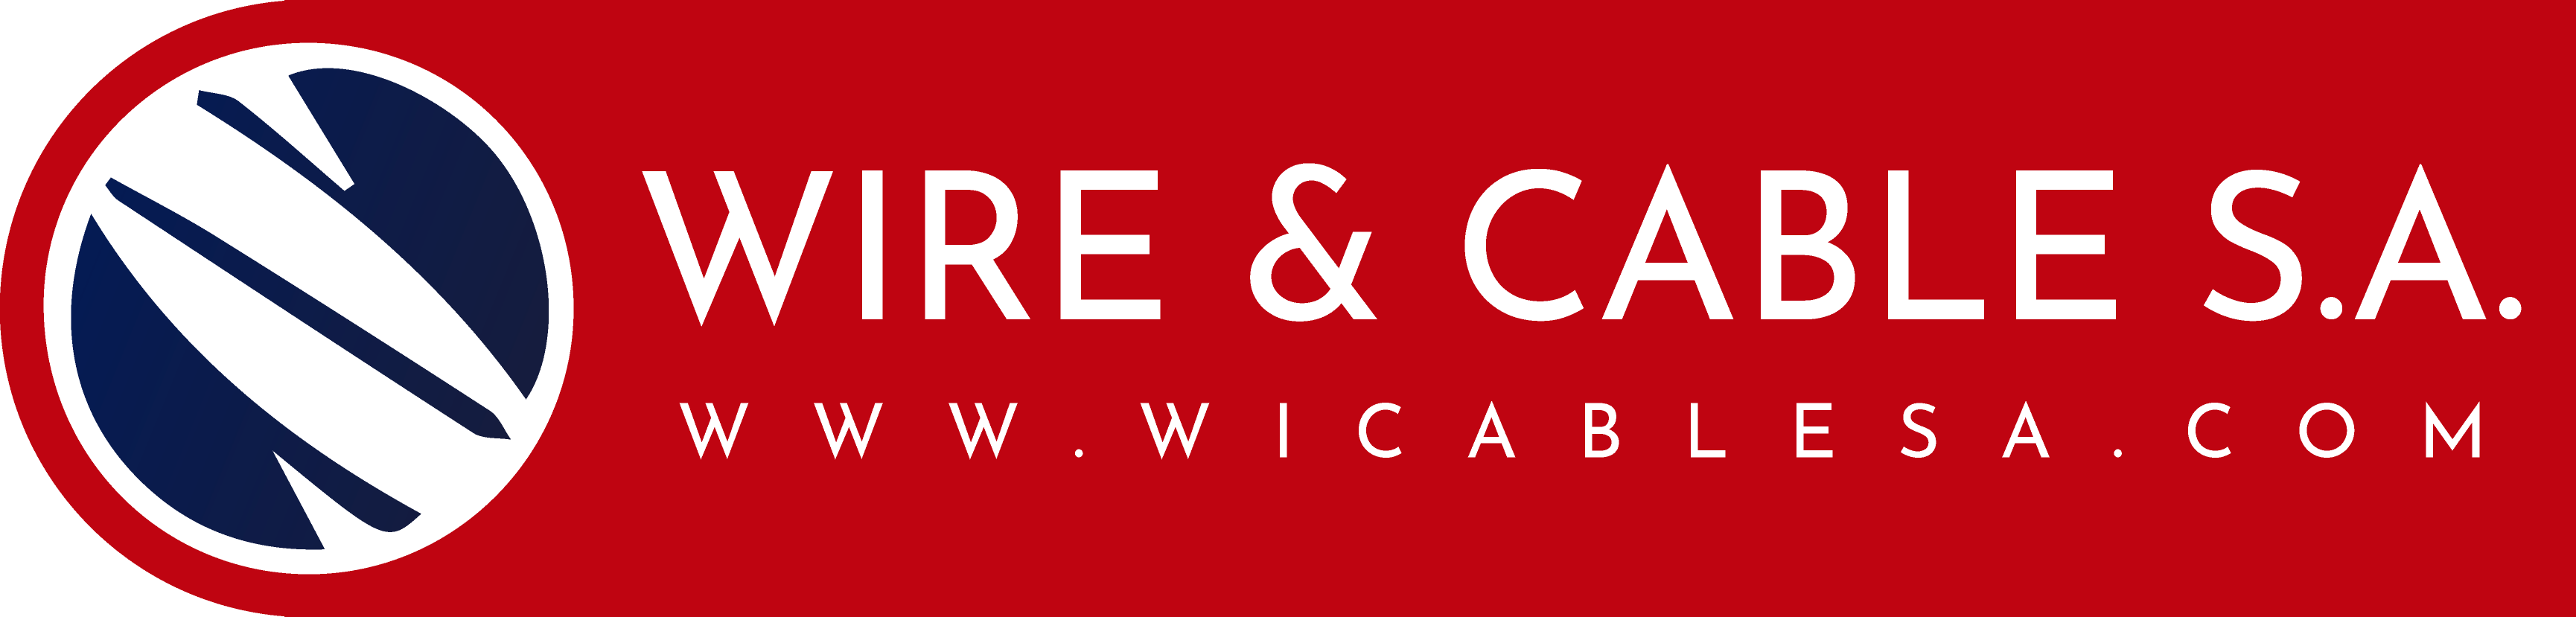 Wicablesa – Wire & Cable S.A.